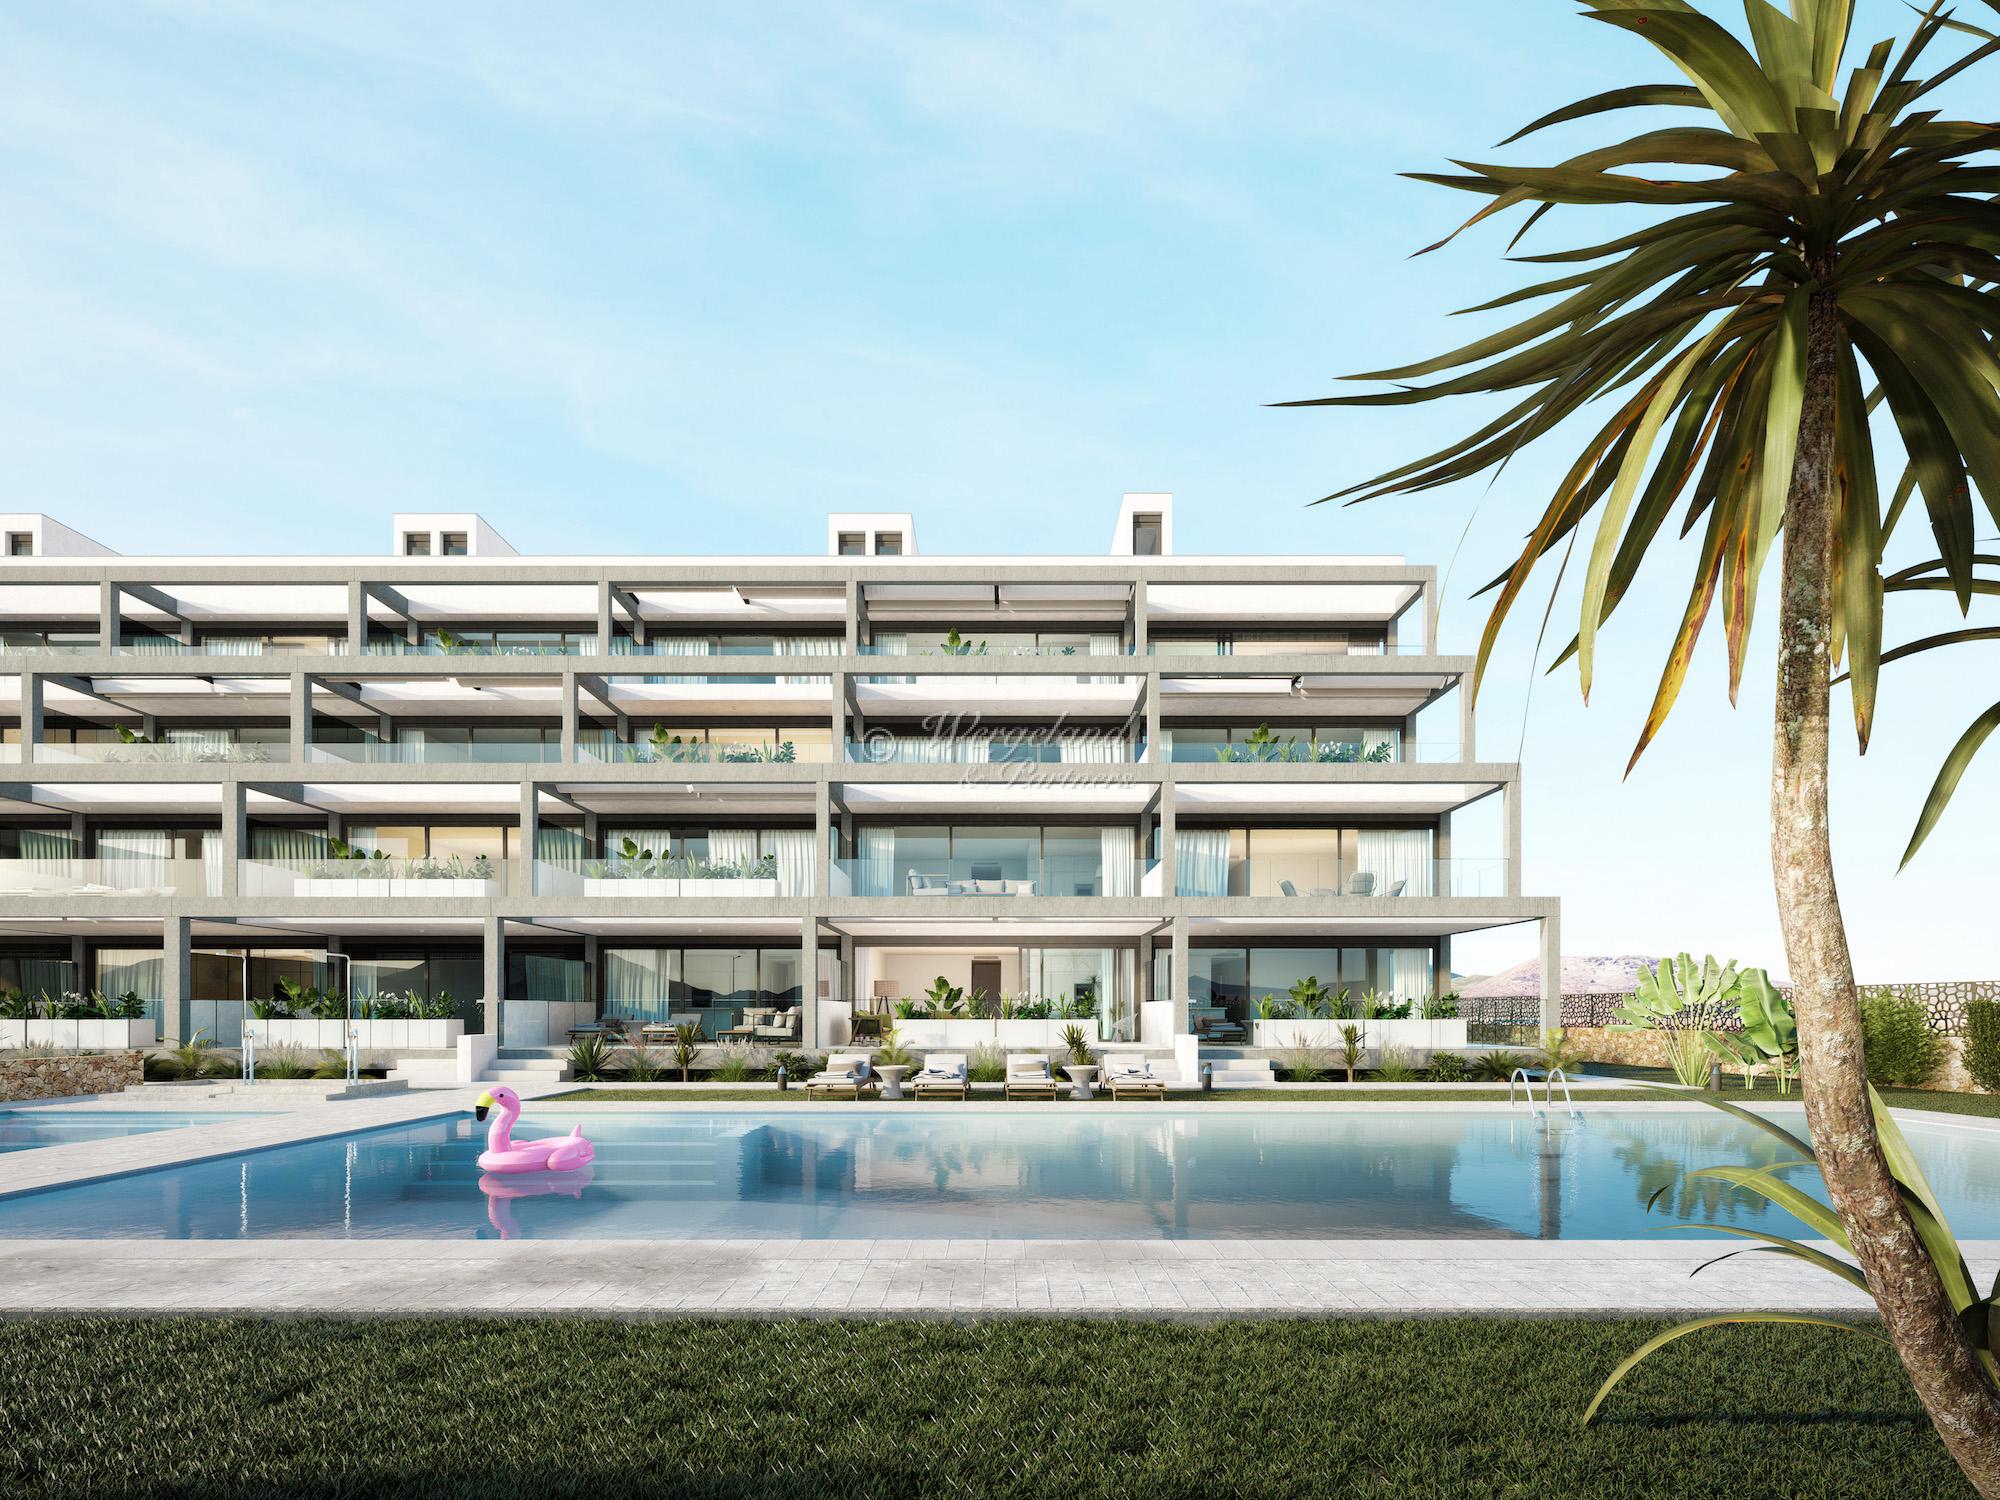 3 bed modern corner apartment by the sea! Shared pool, private garage space and storage [AT41A]